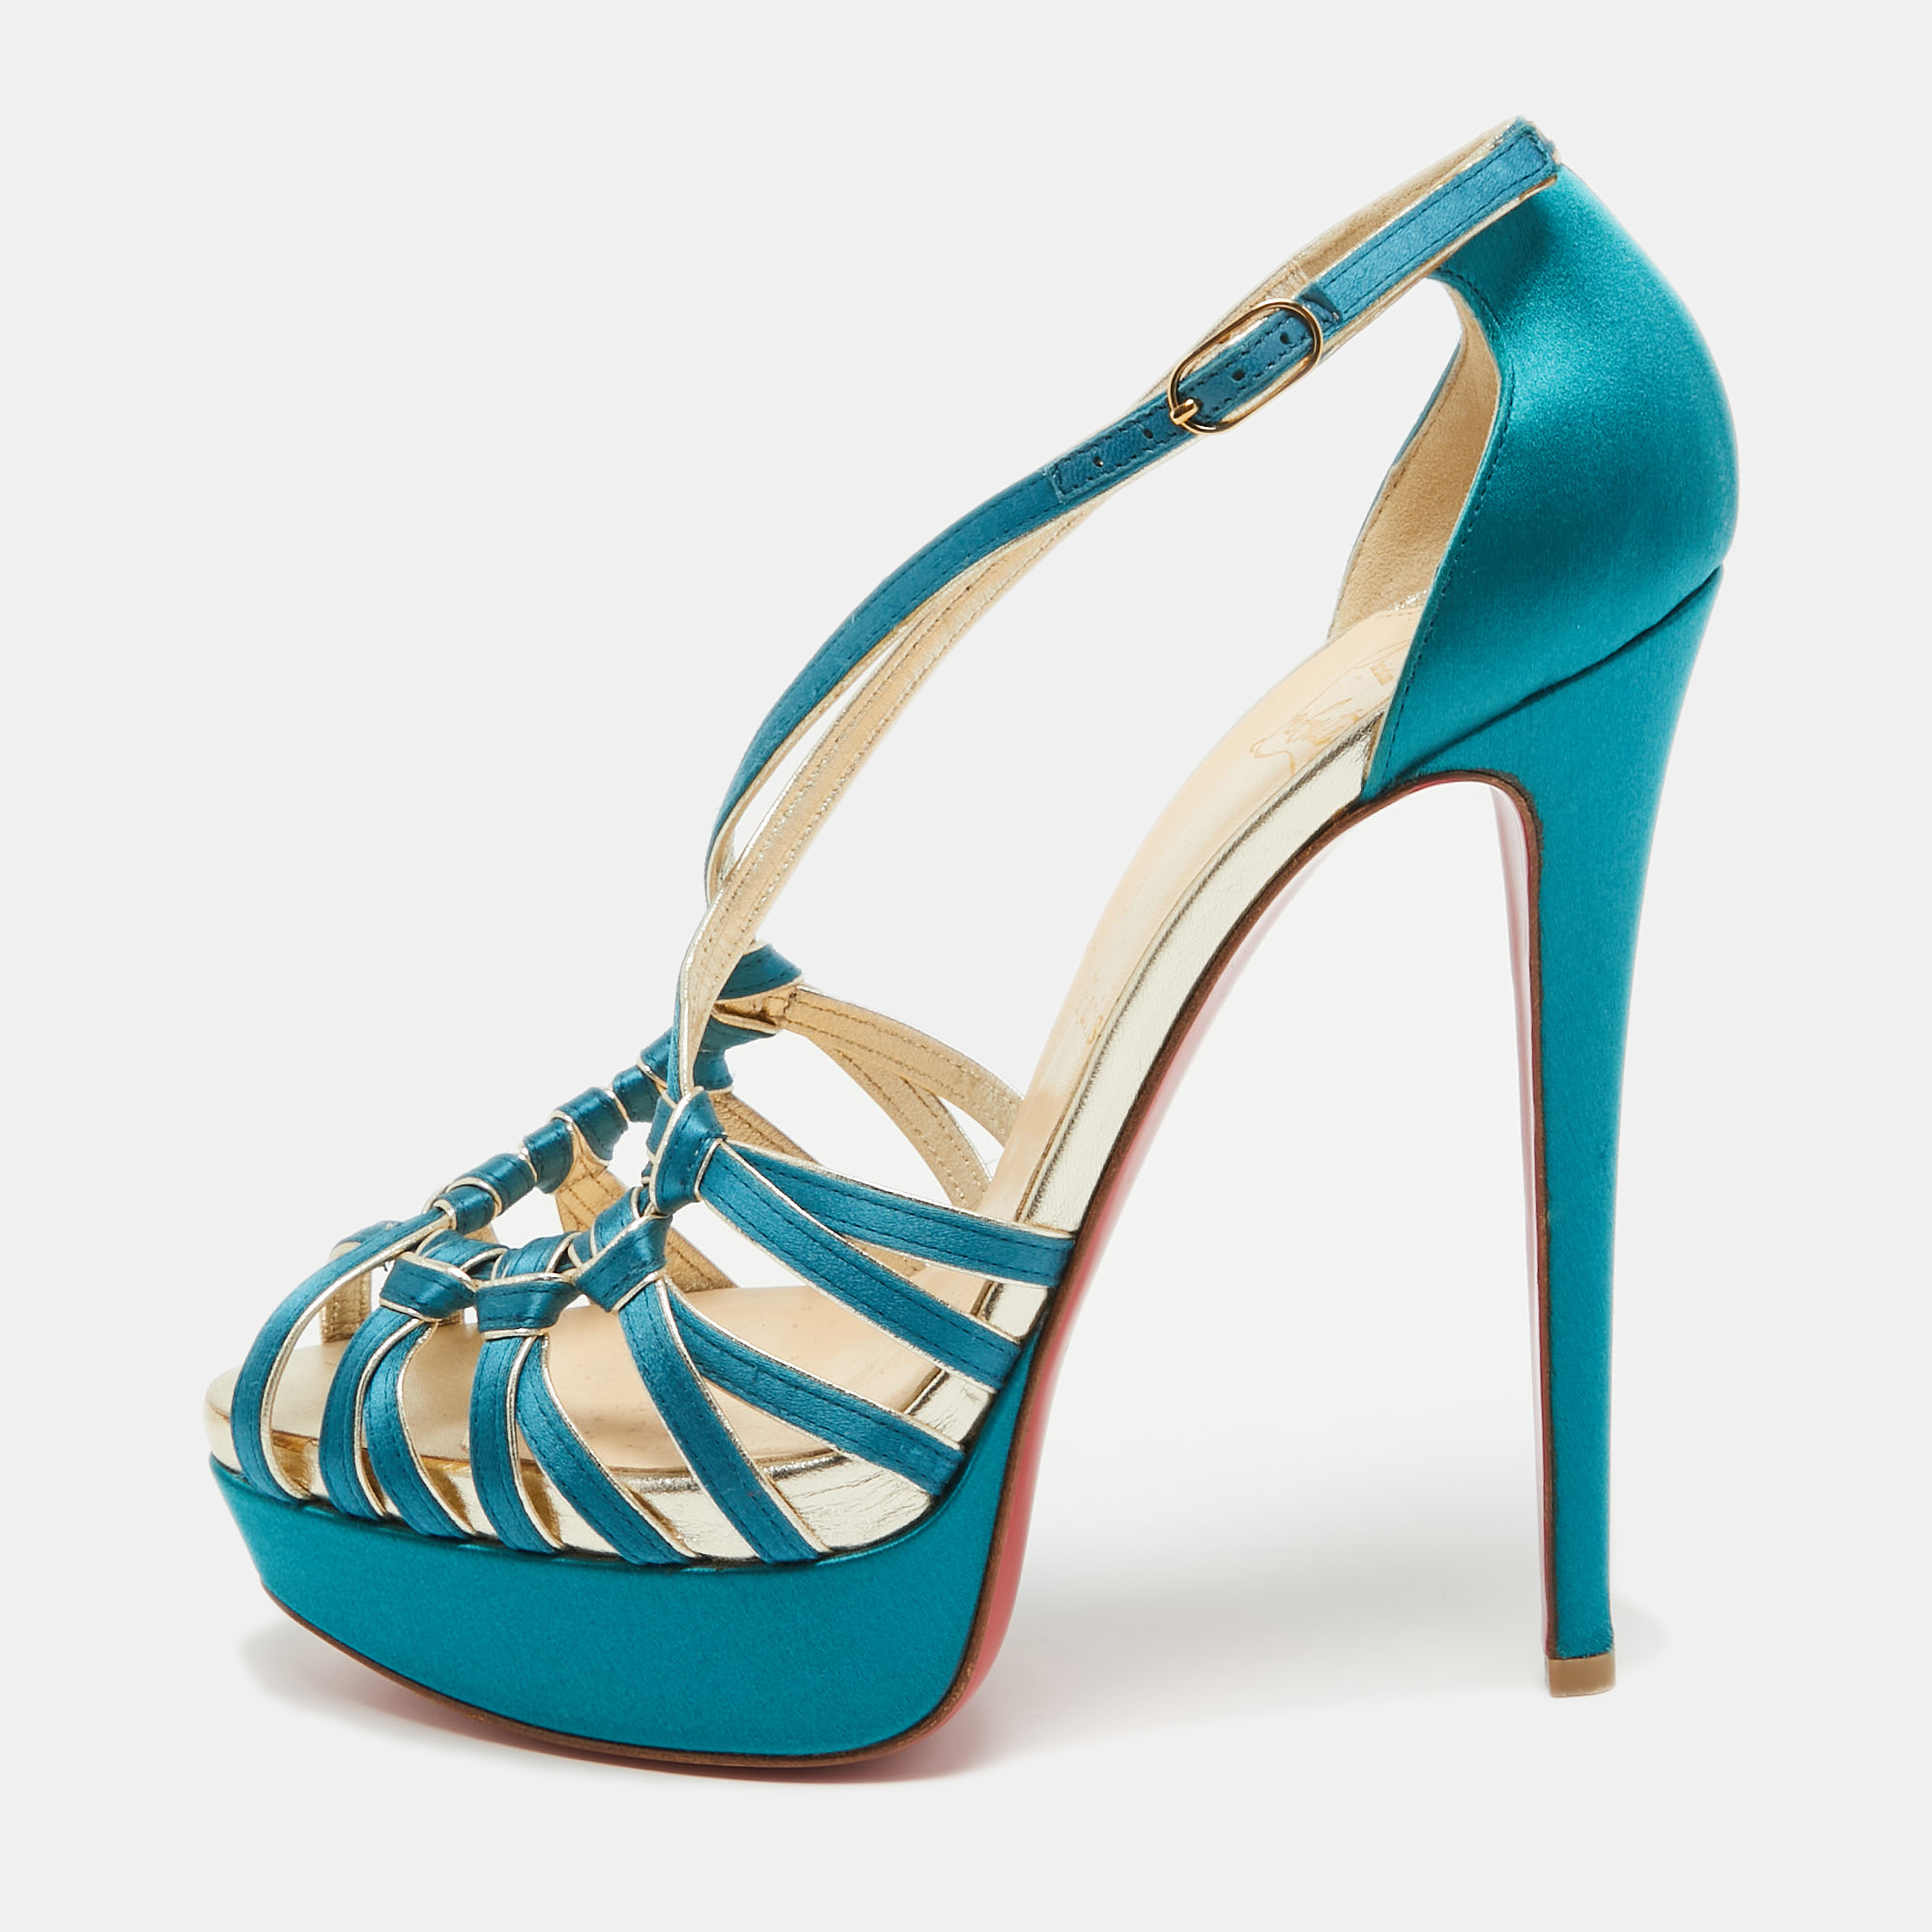 Christian louboutin teal satin knotted strappy platform sandals size 39